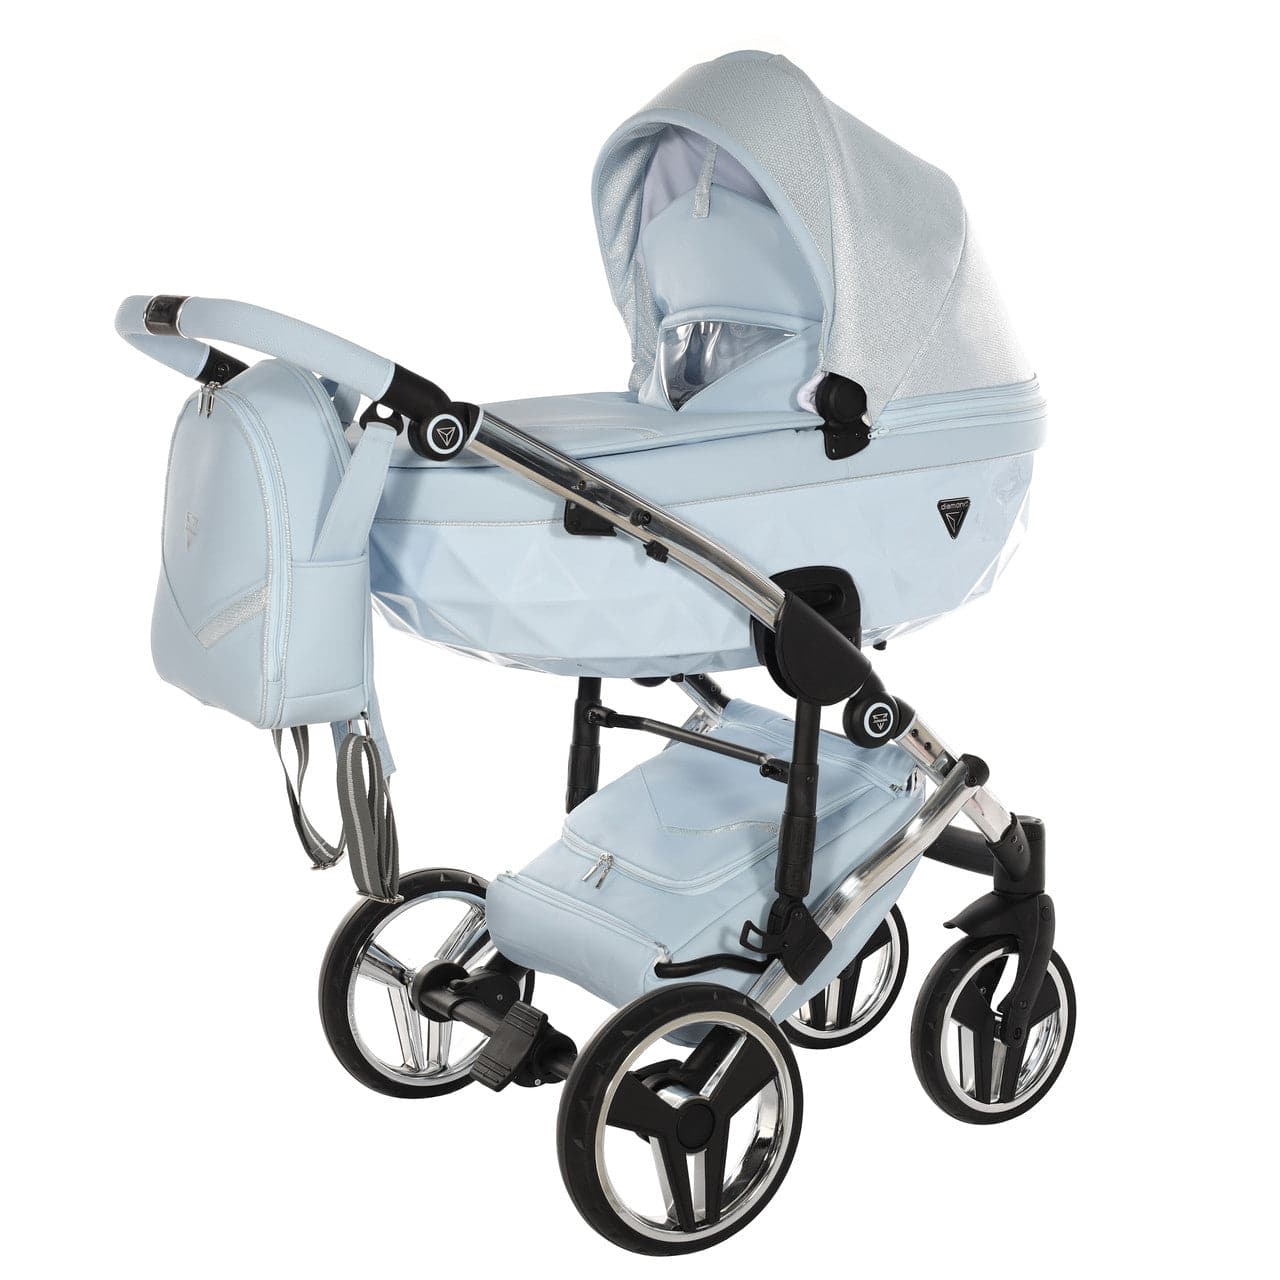 Junama Dolce 2 In 1 Pram - Blue - For Your Little One